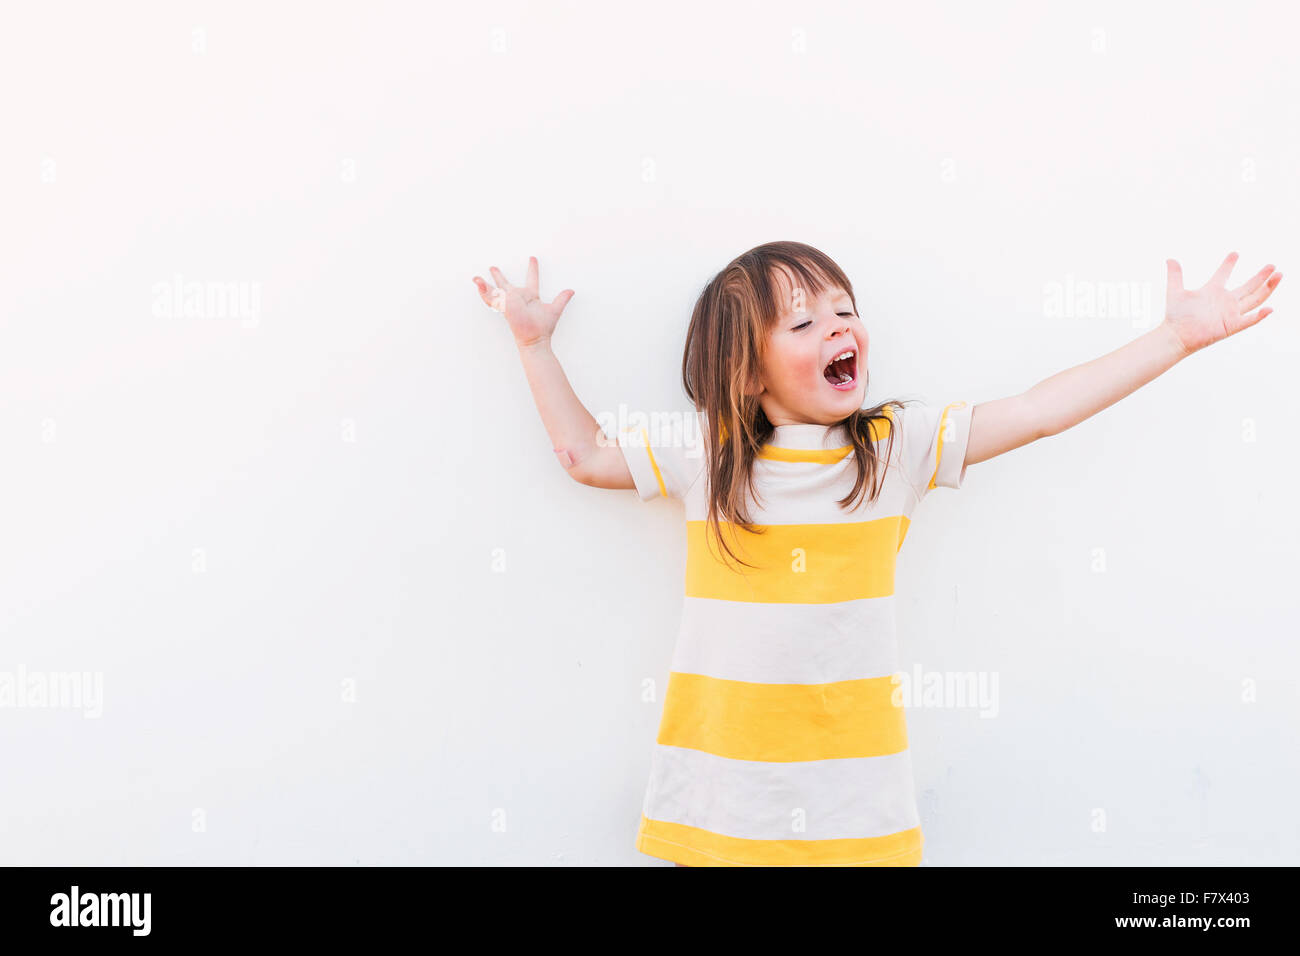 Smiling girl with outstretched arms Stock Photo